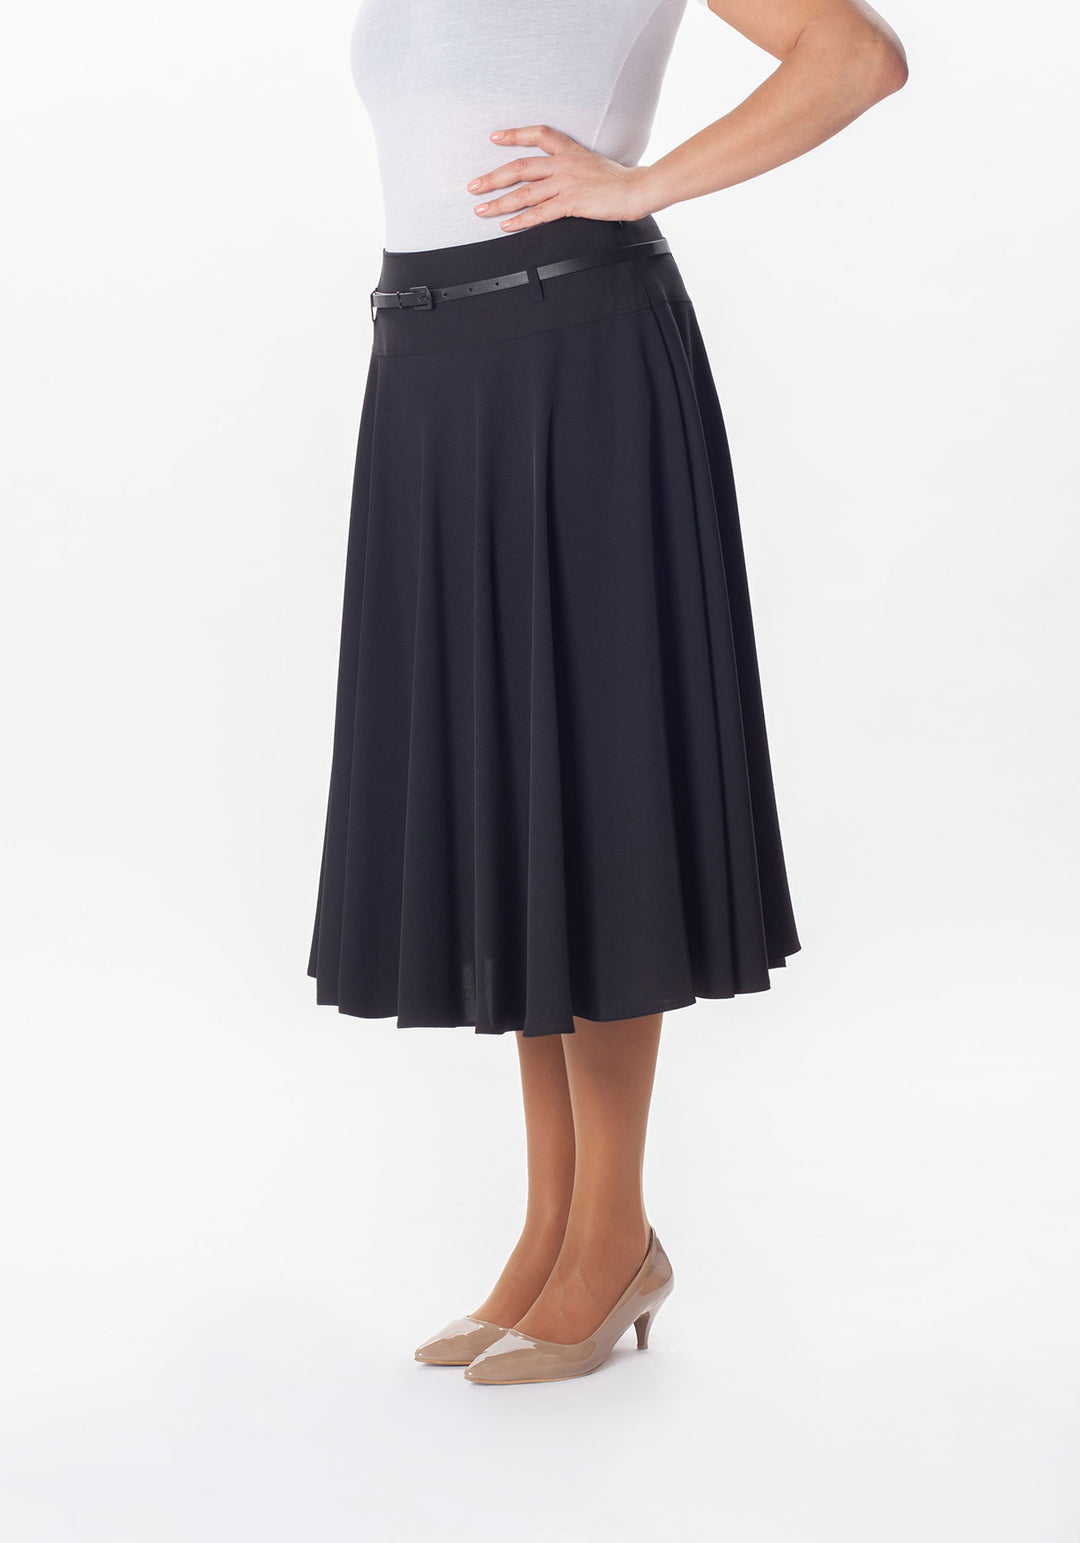 Flare Skirt - Black - Plus Sizes
A-line skirt that's full of swing. It's the perfect length for any occasion. Length: 31.5" Fabric Type: Woven Material: 100% Polyester Made in Turkey
Flare Skirt - Black - Plus Sizes
A-line skirt that's full of swing. It's the perfect length for any occasion. Length: 31.5" Fabric Type: Woven Material: 100% Polyester.
40214101

$89.99
$89.99
$89.99
flare skirt, plus size, plus skirt, skirt
Skirt
Guzella
$129.99
$129.99
$129.99
Size: 12, 14, 16, 18, 20
Color: Black

Le' Diva B